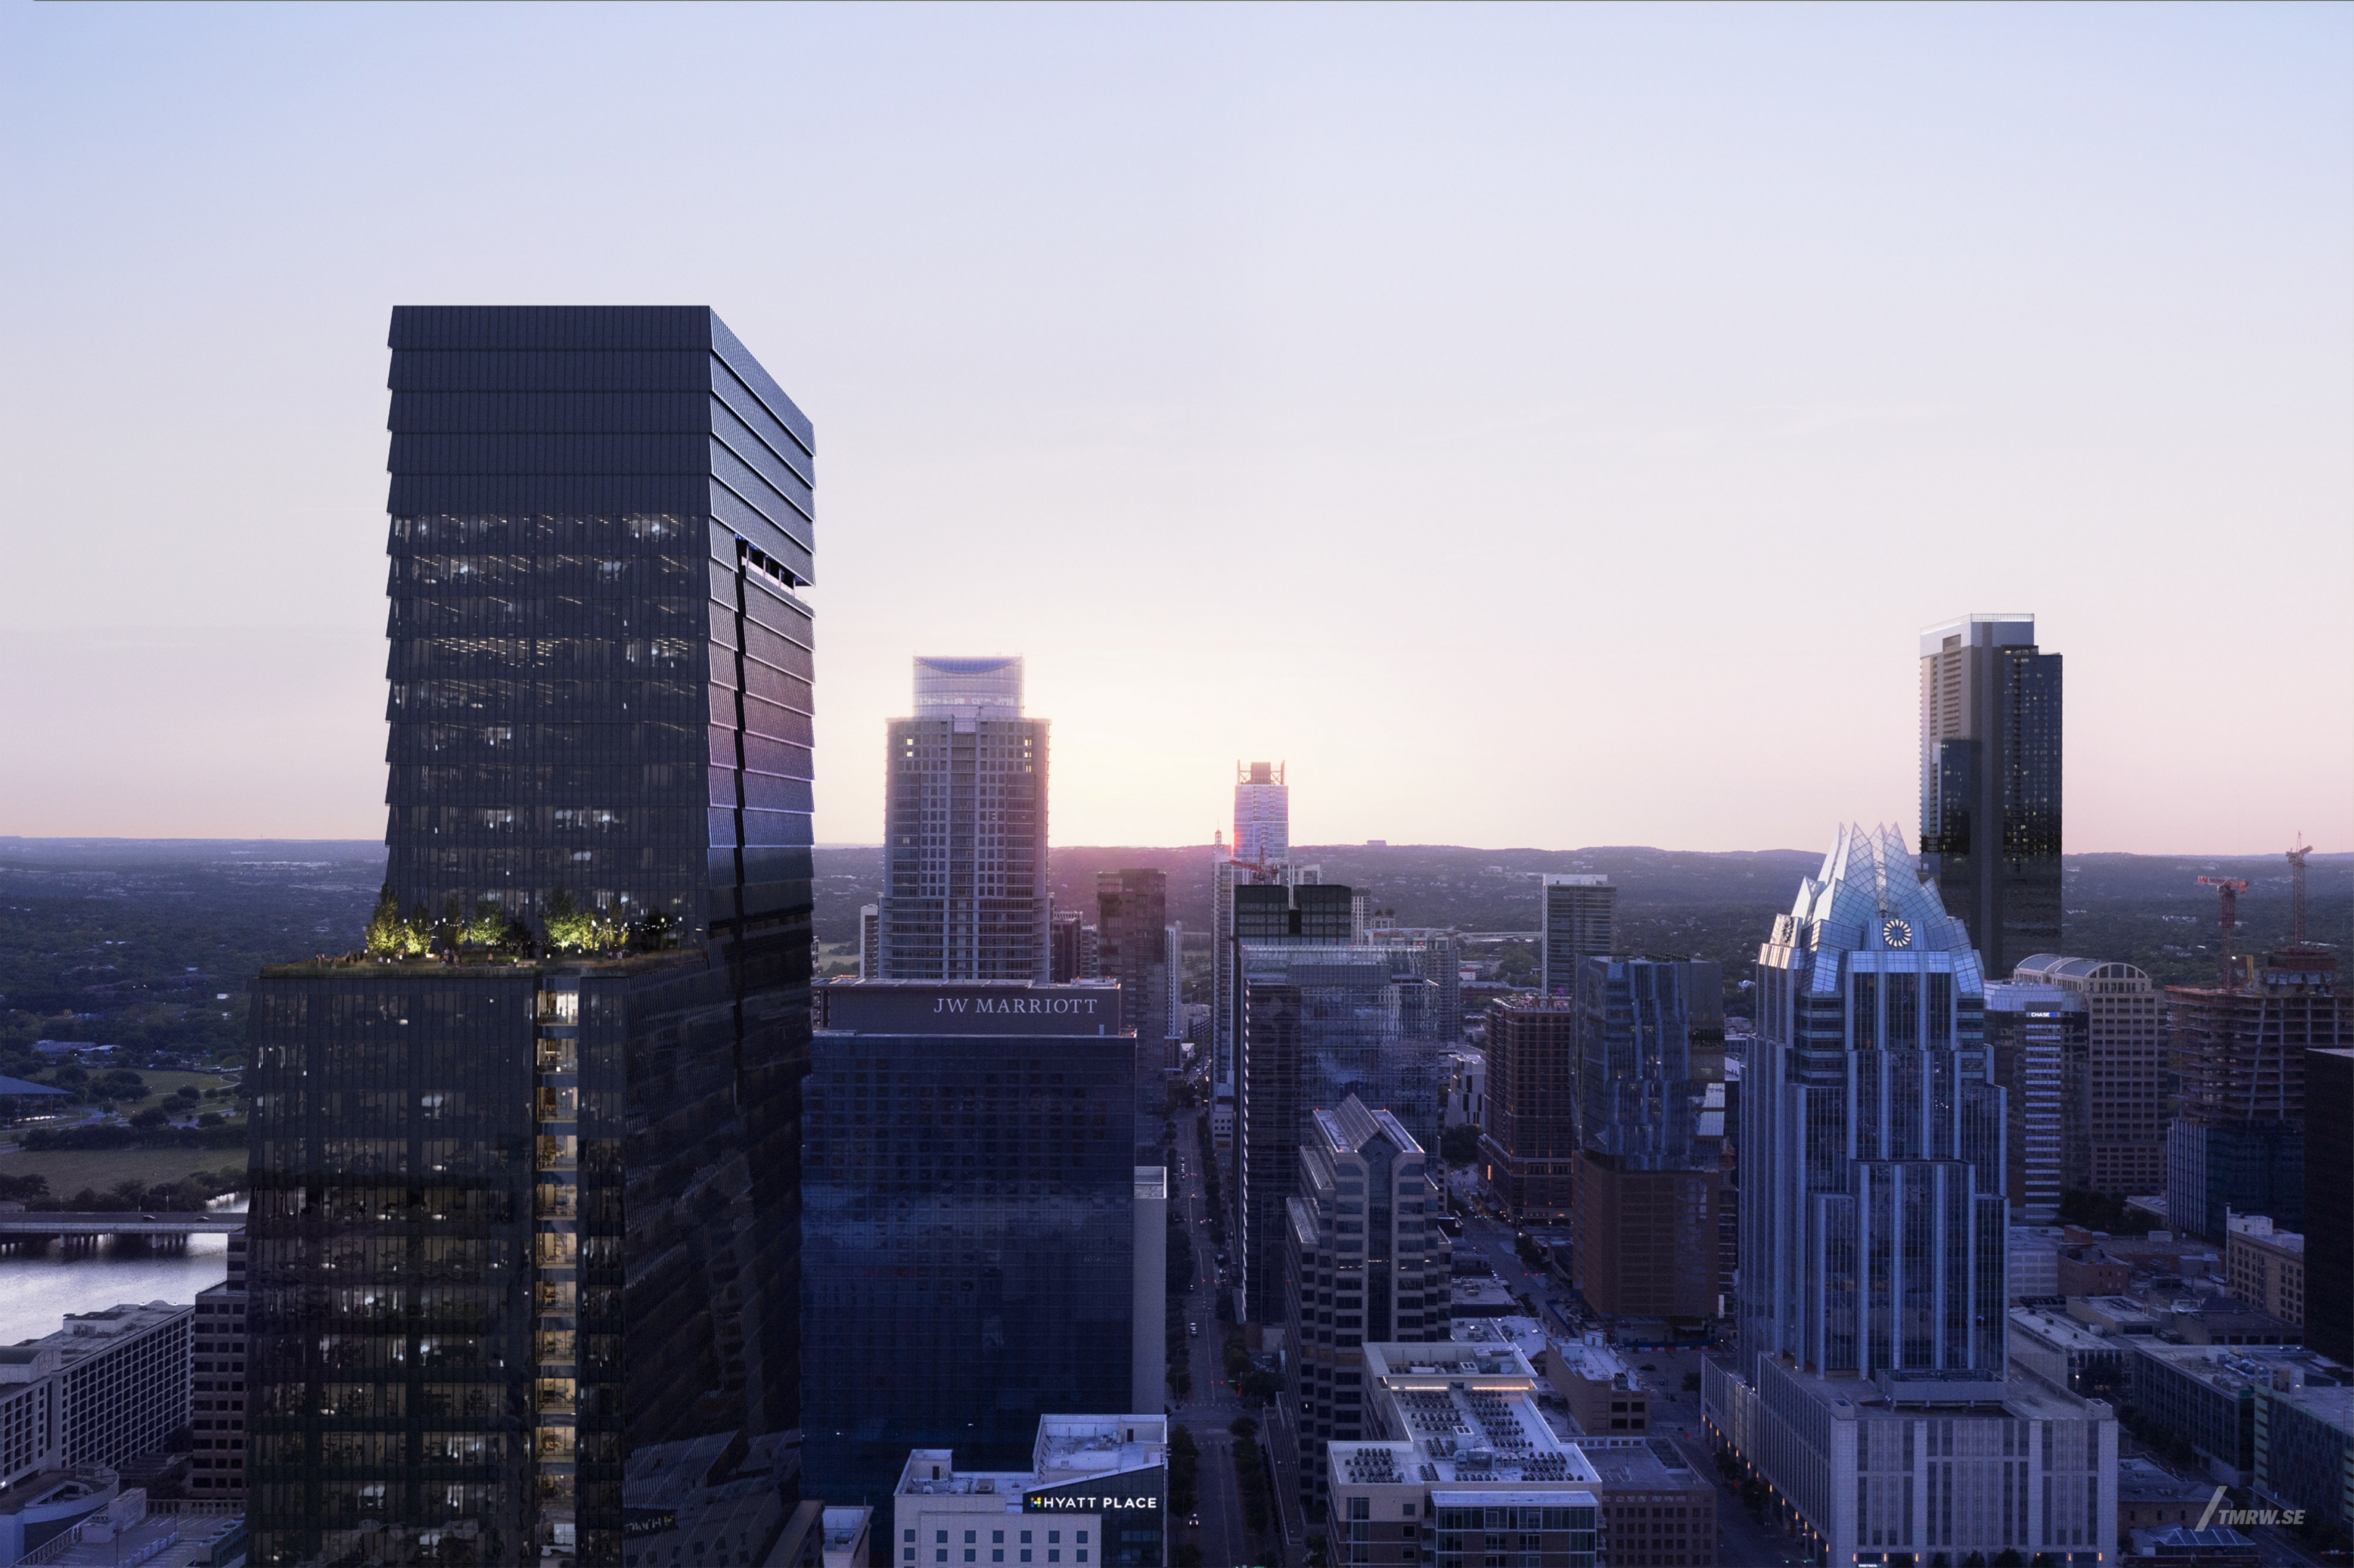 Architectural visualization of Block 16 for Gensler. A image of several office buildings at dusk from a semi aerial view.